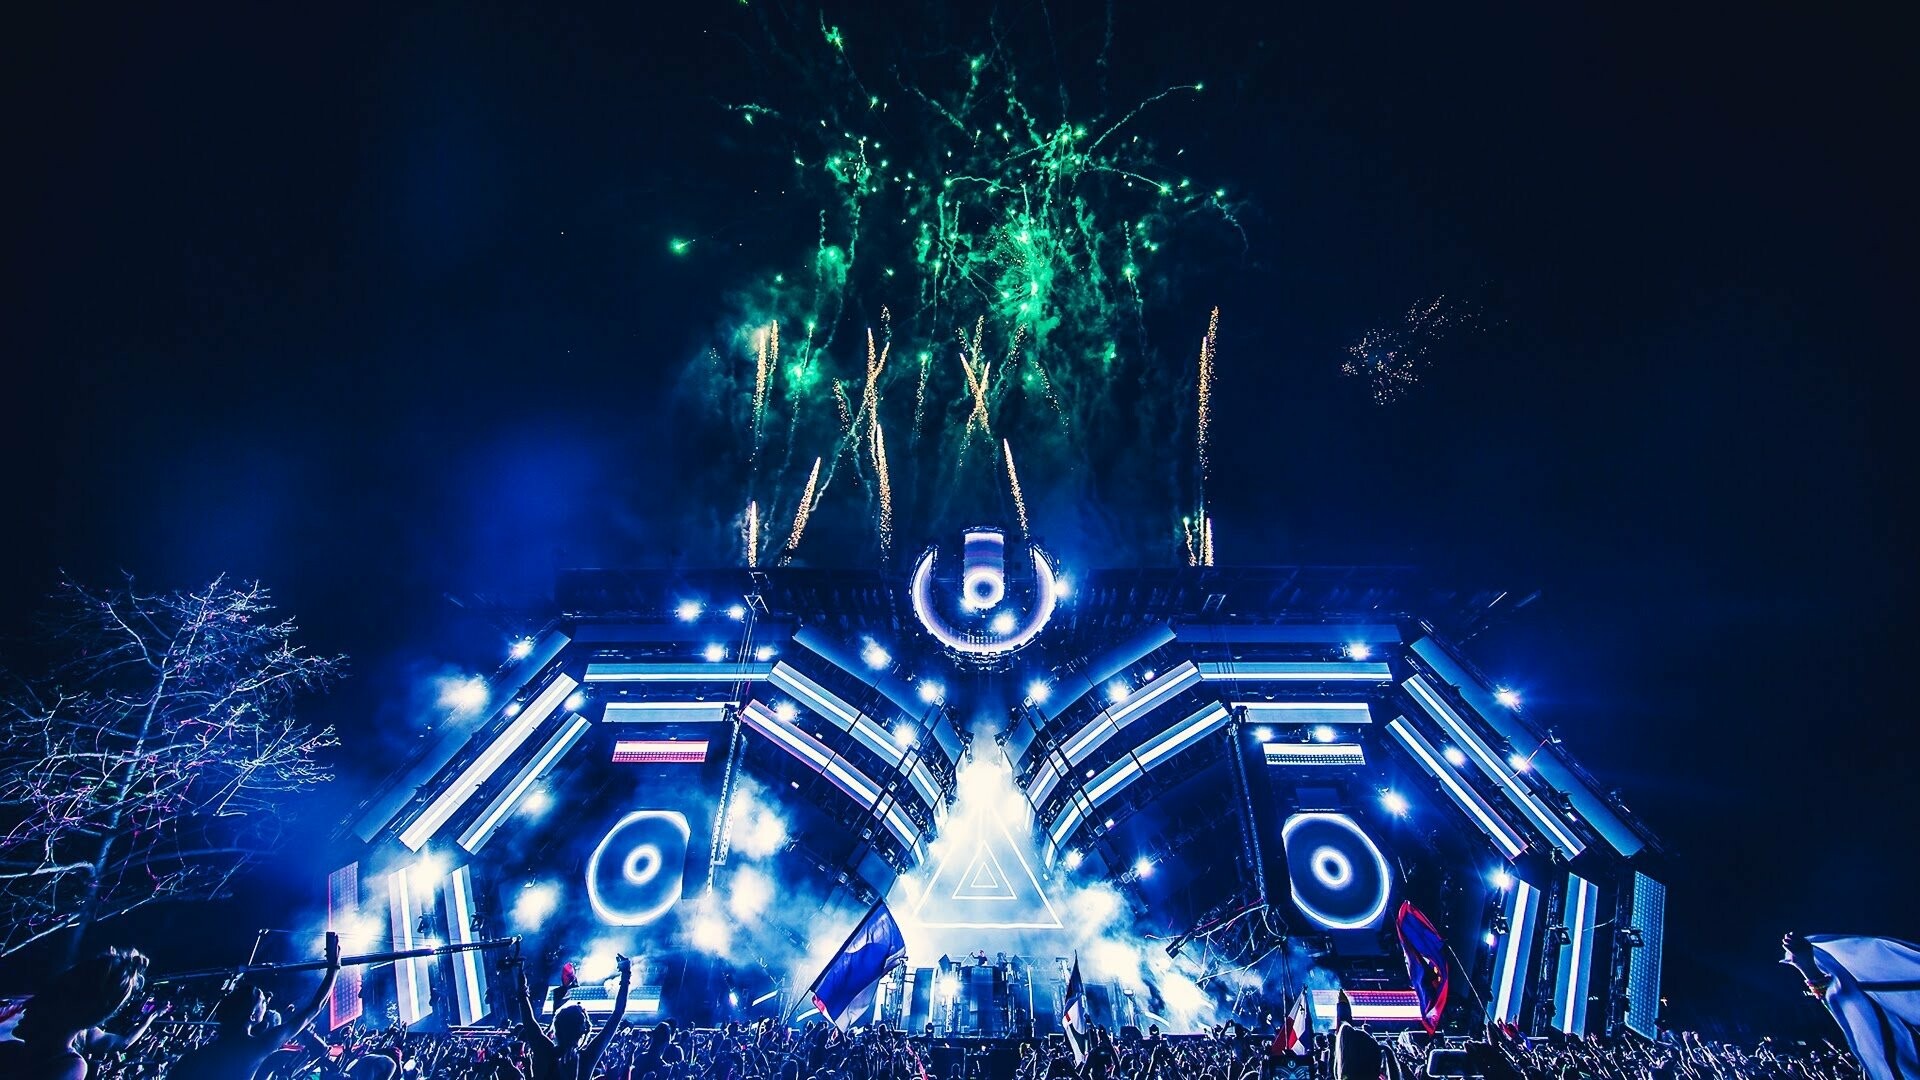 Festival: UMF, A community event with EDM performances. 1920x1080 Full HD Background.